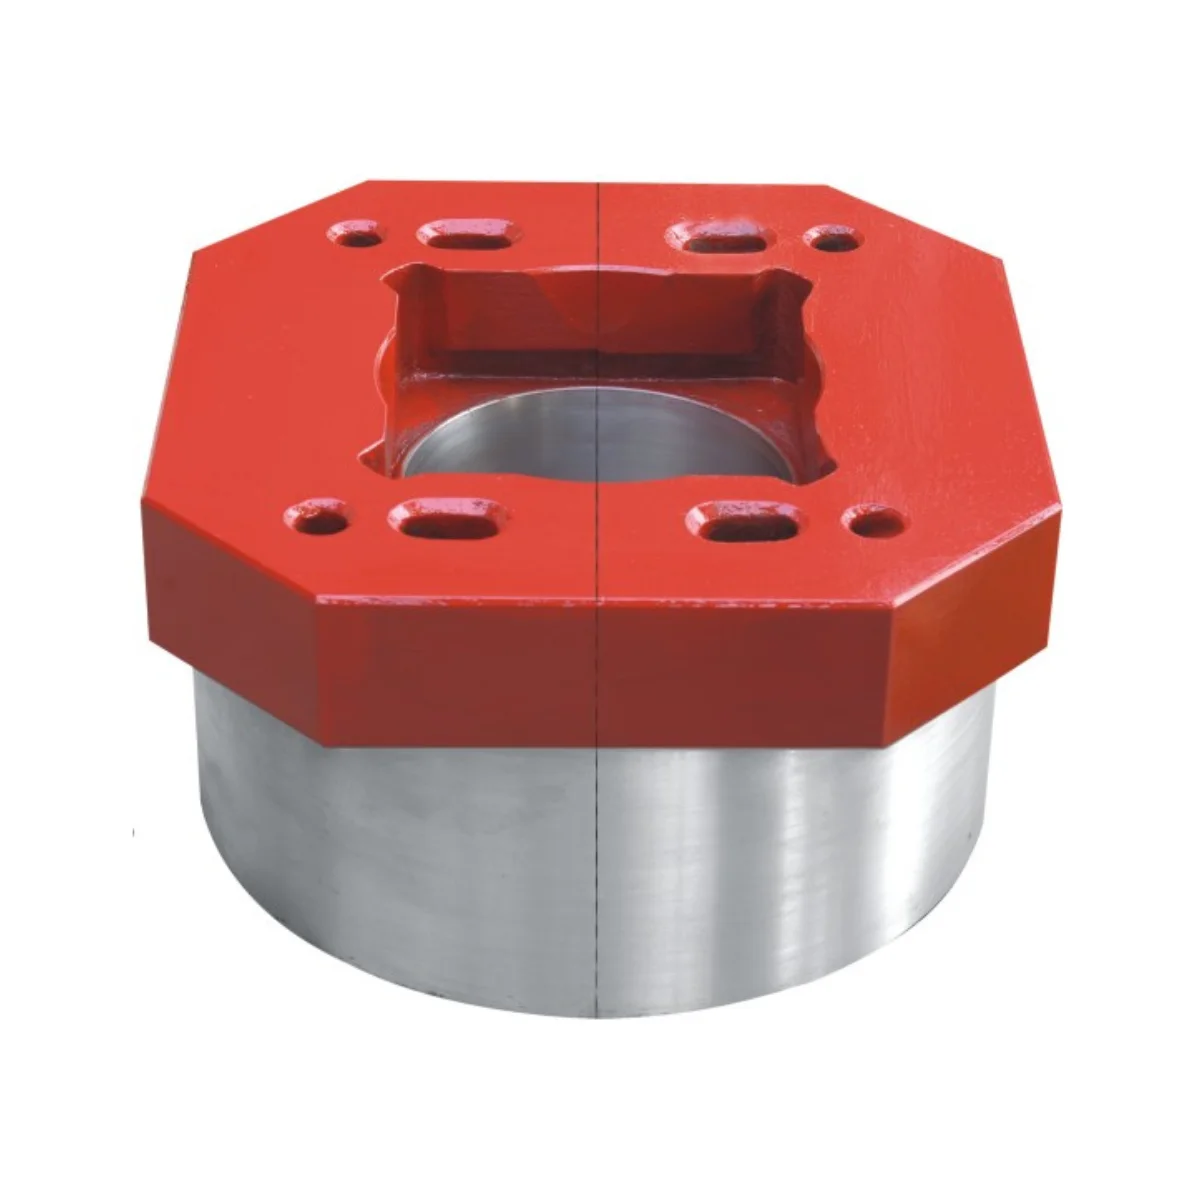 This Master Bushings for oilfield handling tools, including equivalents for NOV MPCH, Wirth, DenCon, Varco, Oilwell, Emsco, HMH, National, Forum, and BVm, all designed for 27.5-inch rotary tables. Additionally, master bushings for specific brands and sizes, such as Varco 49.5-inch and DenCon 49.5-inch rotary tables, are shown. These components are crucial for secure connections between the rotary table and drill string, ensuring smooth and efficient drilling operations.